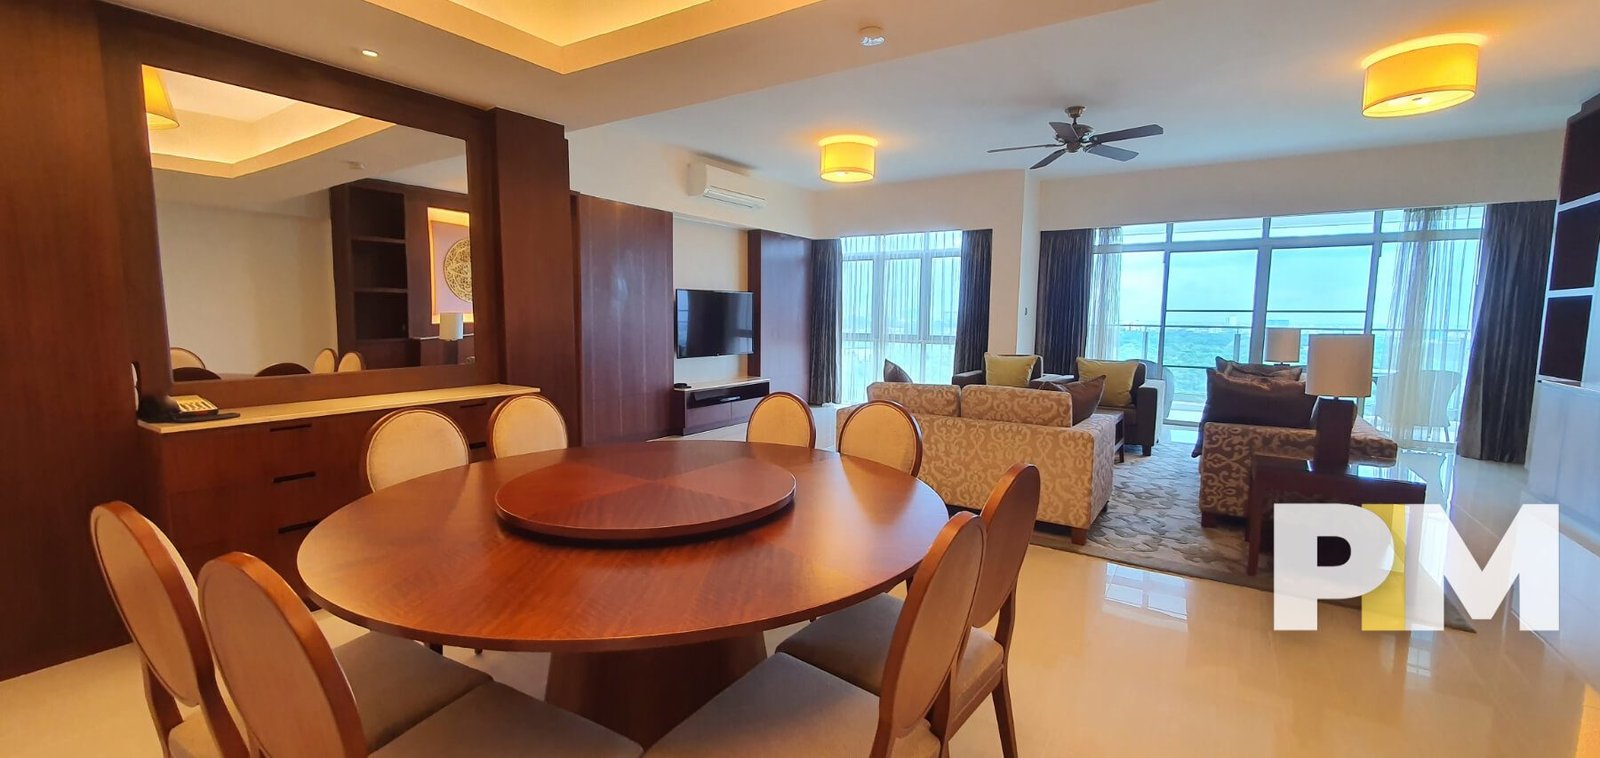 Dining area - Real Estate in Yangon